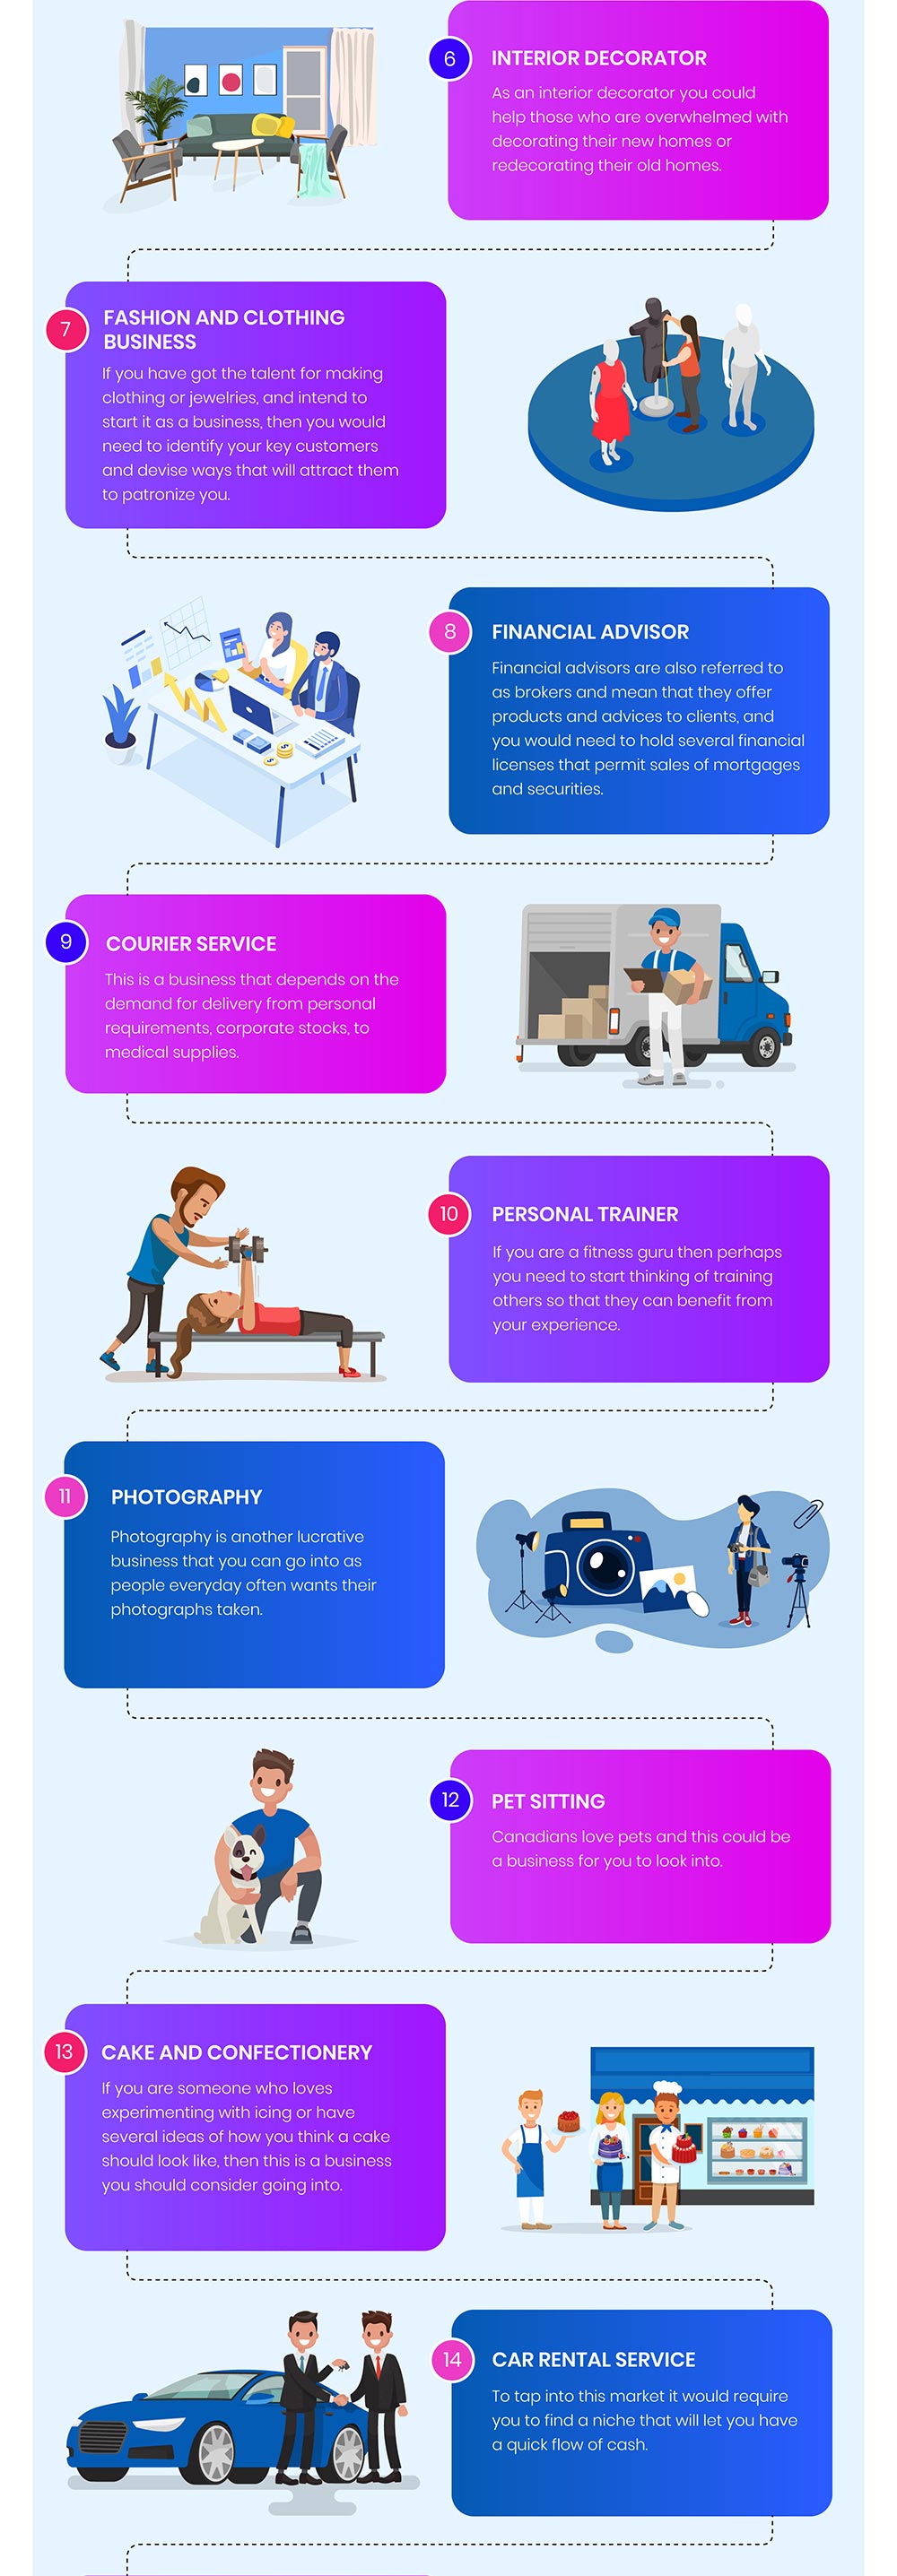 20 small business ideas for 2019 infographic